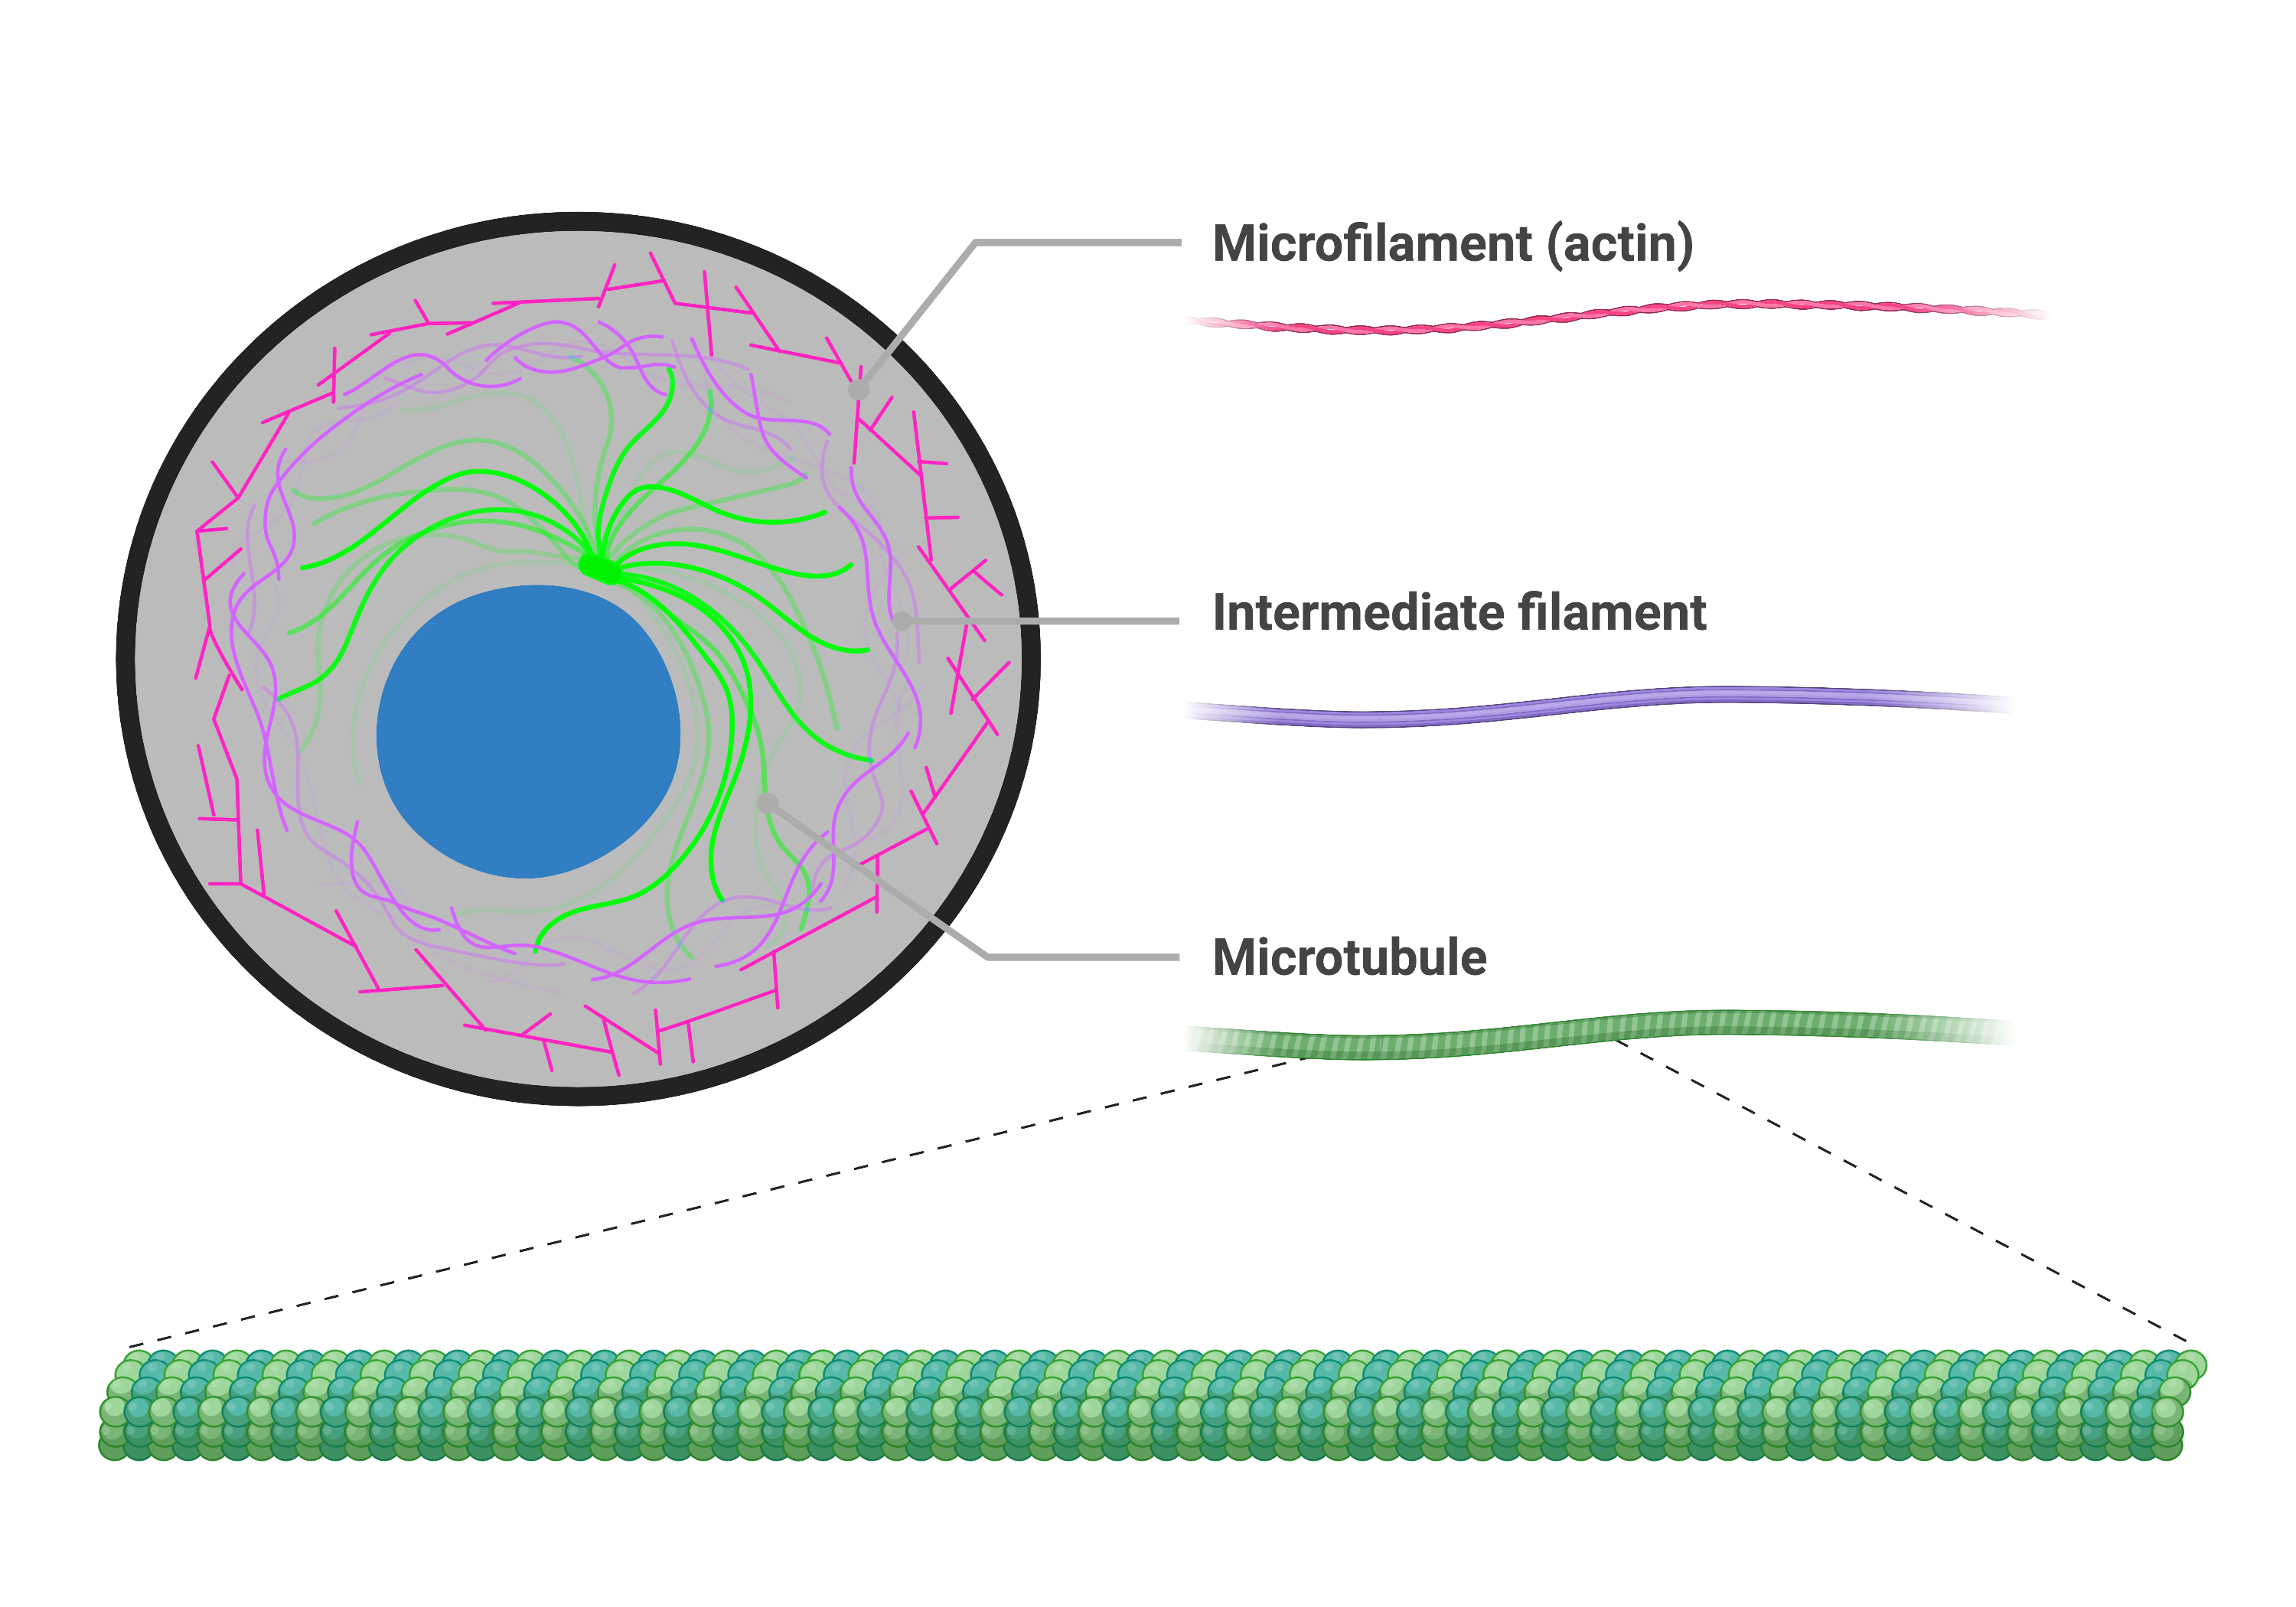 Illustration showing that the cytoskeleton is made up of microfilaments, intermediate filaments, and microtubules.